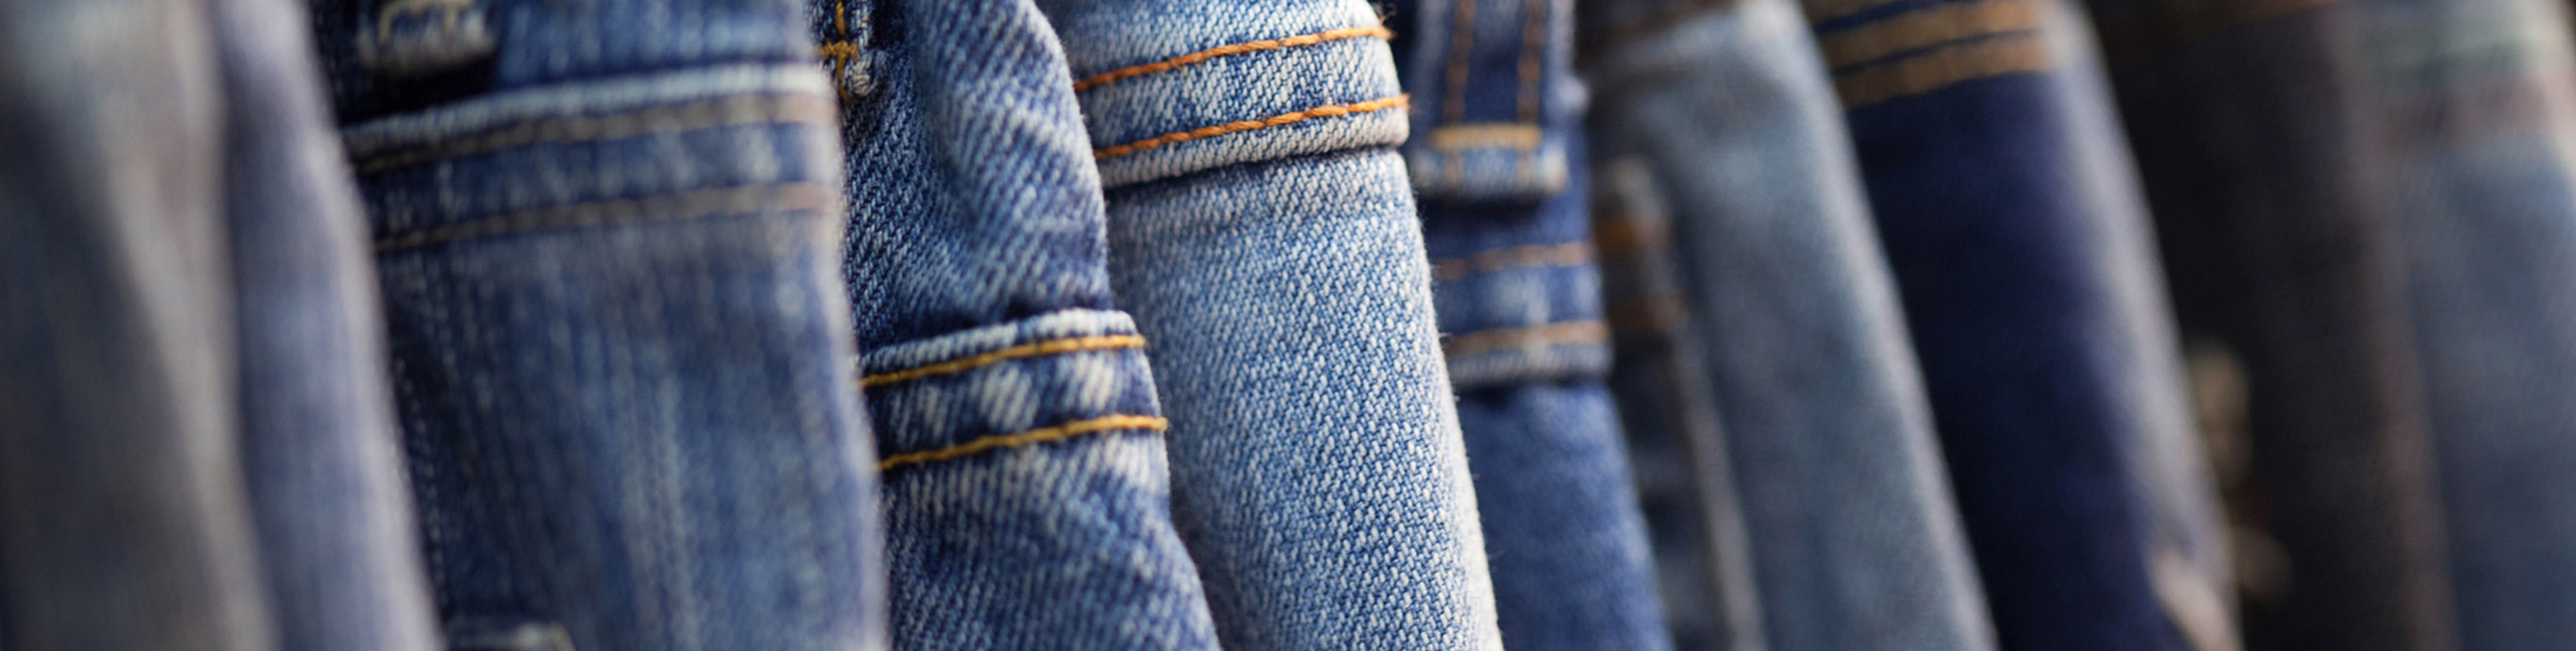 From Research to Production: How Foam Dyeing with Indigo Could  Revolutionize the Denim Industry